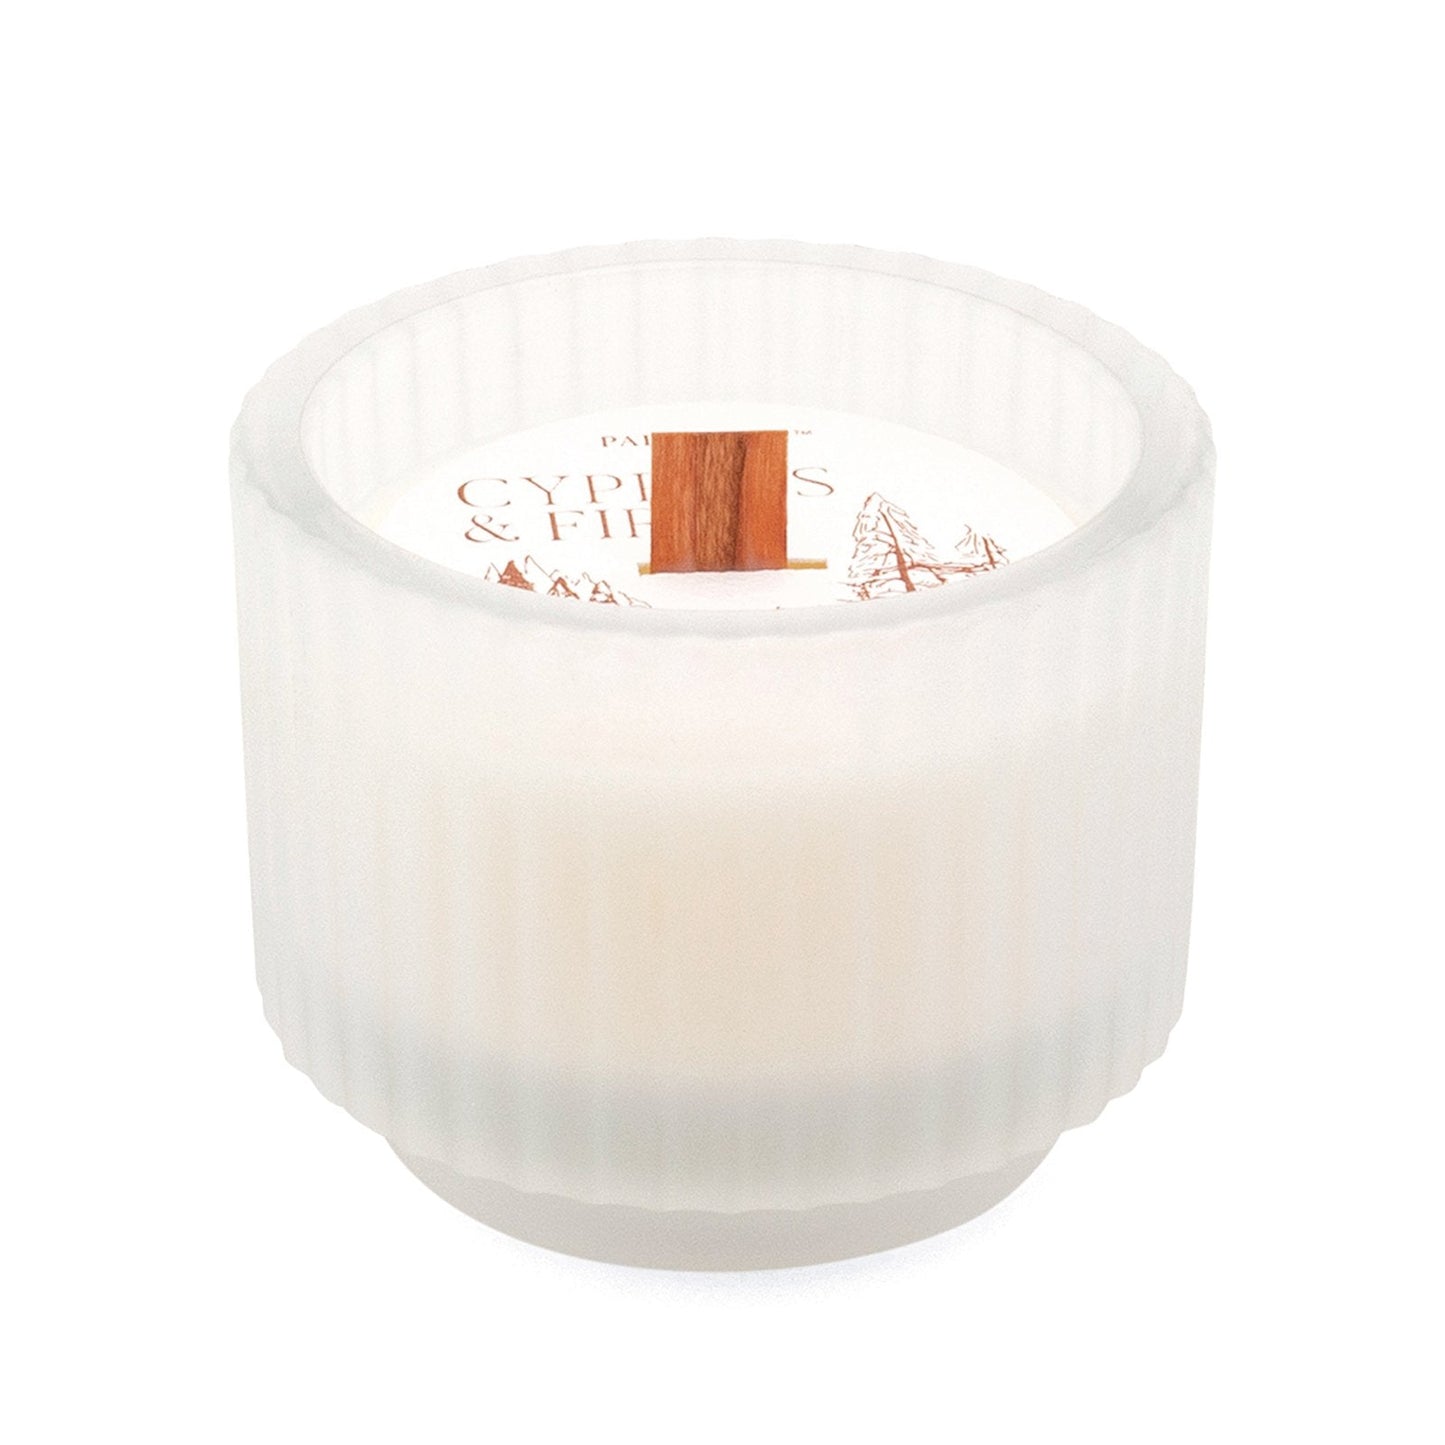 Cypress & Fir - Frosted Glass + Crackling Wood Wick (141g)